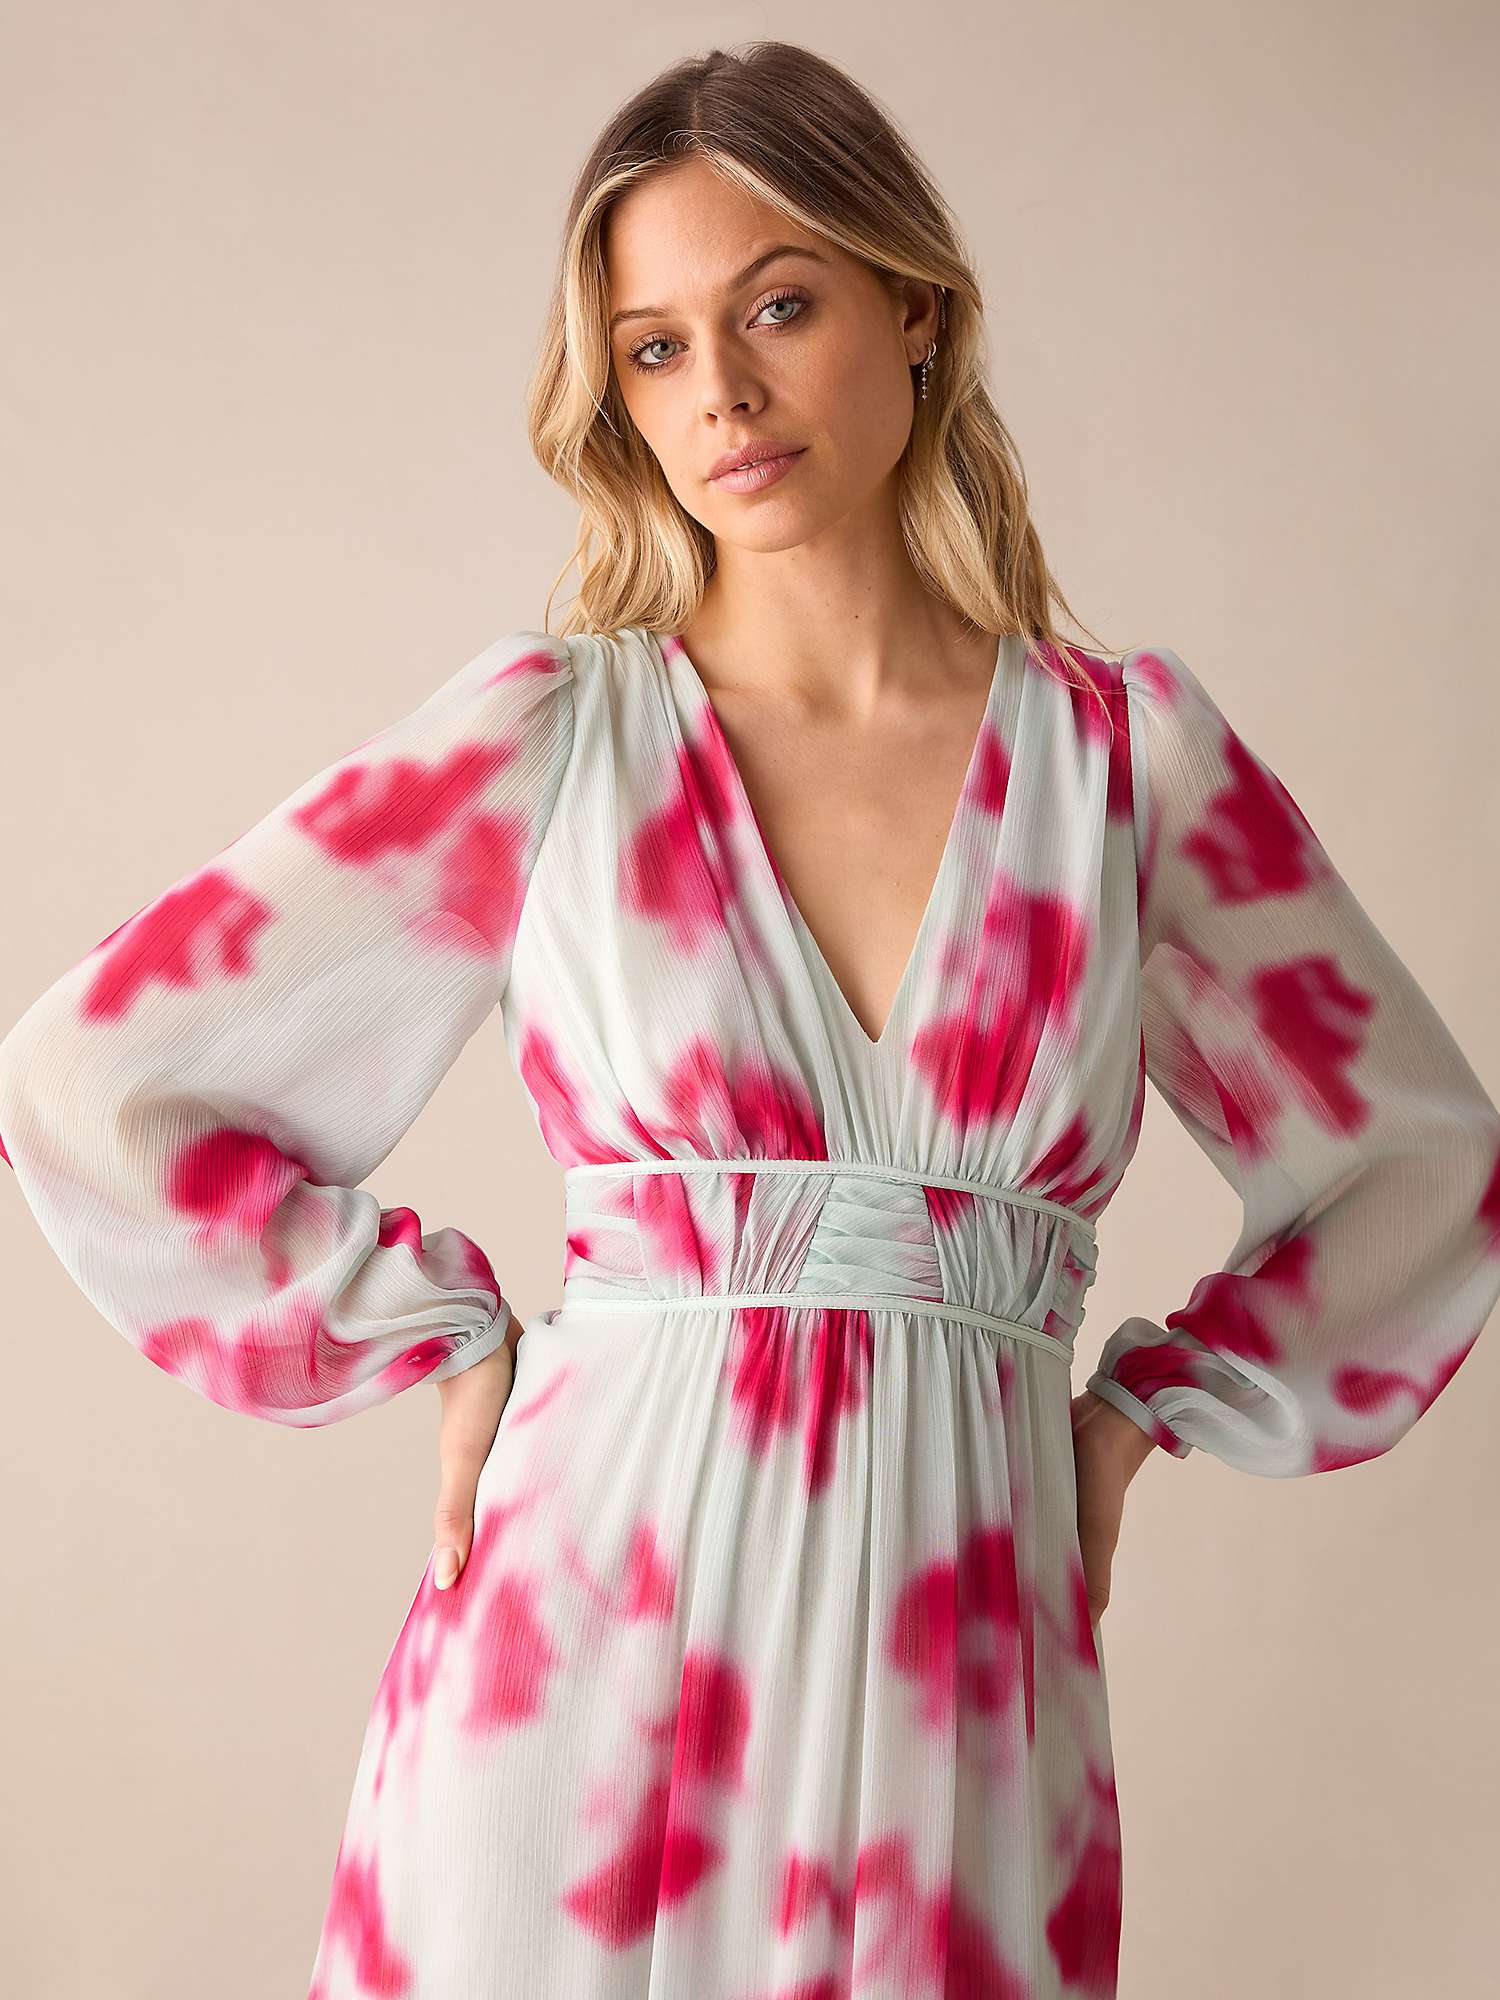 Buy Ro&Zo Stephanie Blurred Floral Maxi Dress, Pink/White Online at johnlewis.com